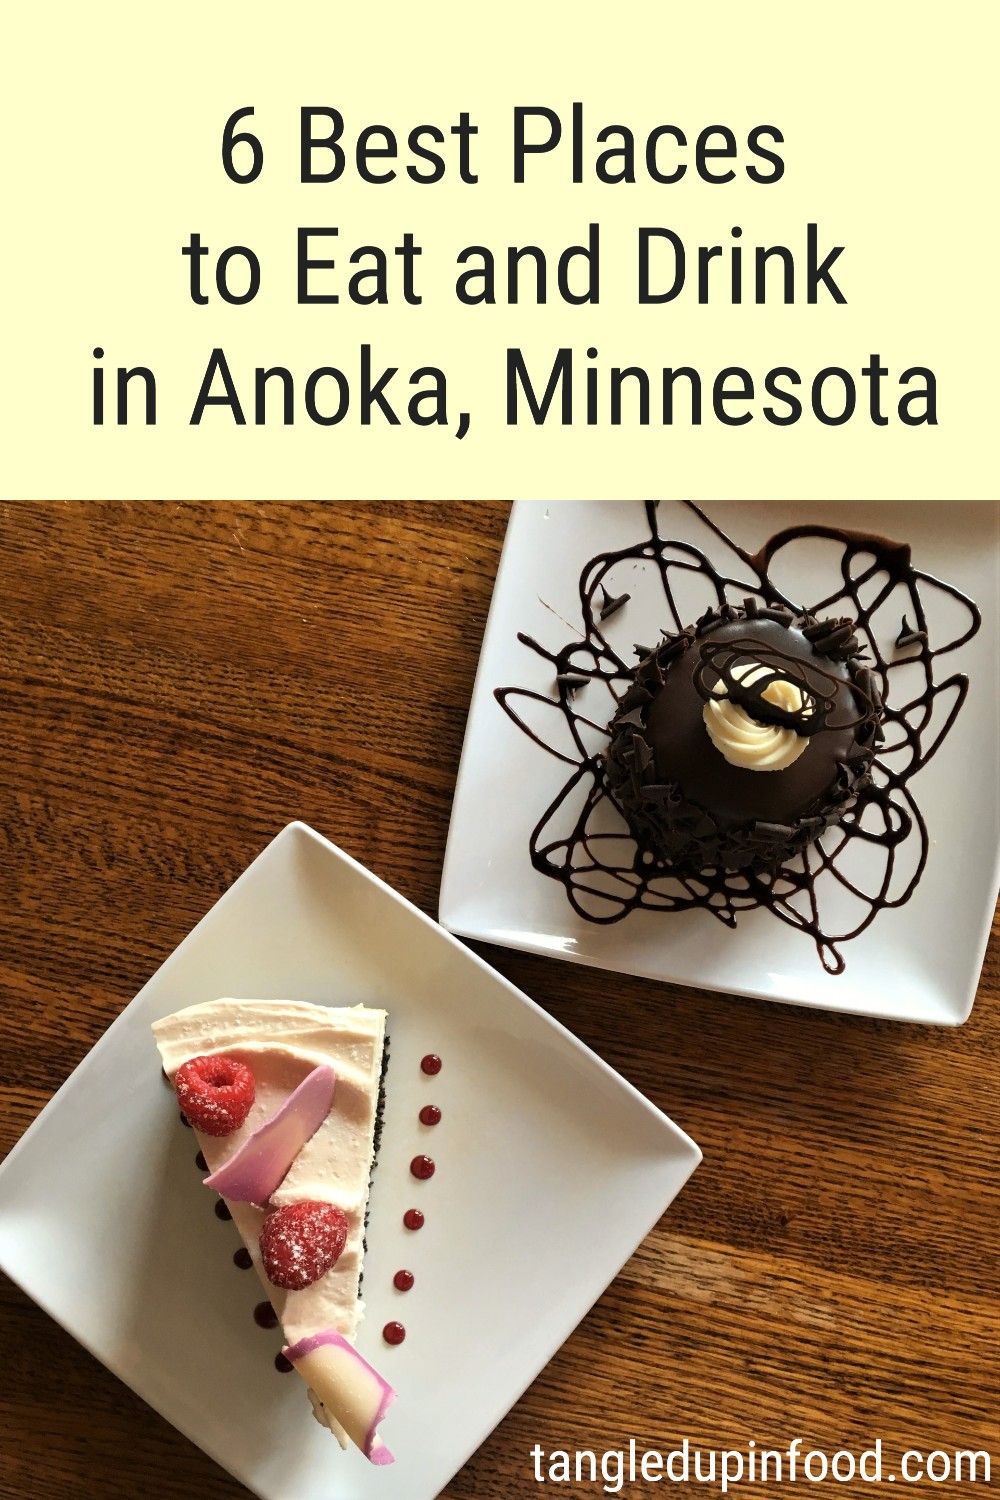 Top down view of slice of cheesecake and a chocolate dessert with text reading "6 best places to eat and drink in Anoka Minnesota"